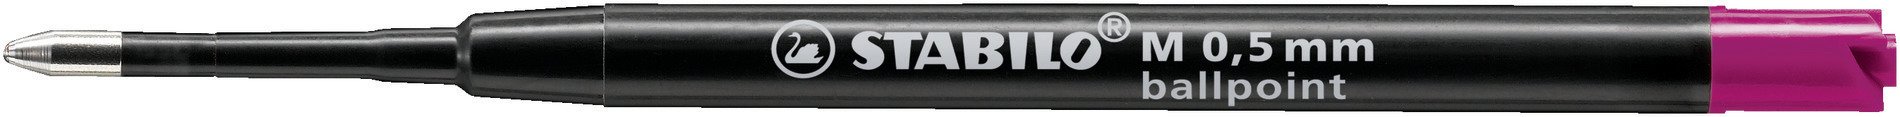 Recharges STABILO Ballpoint Refill